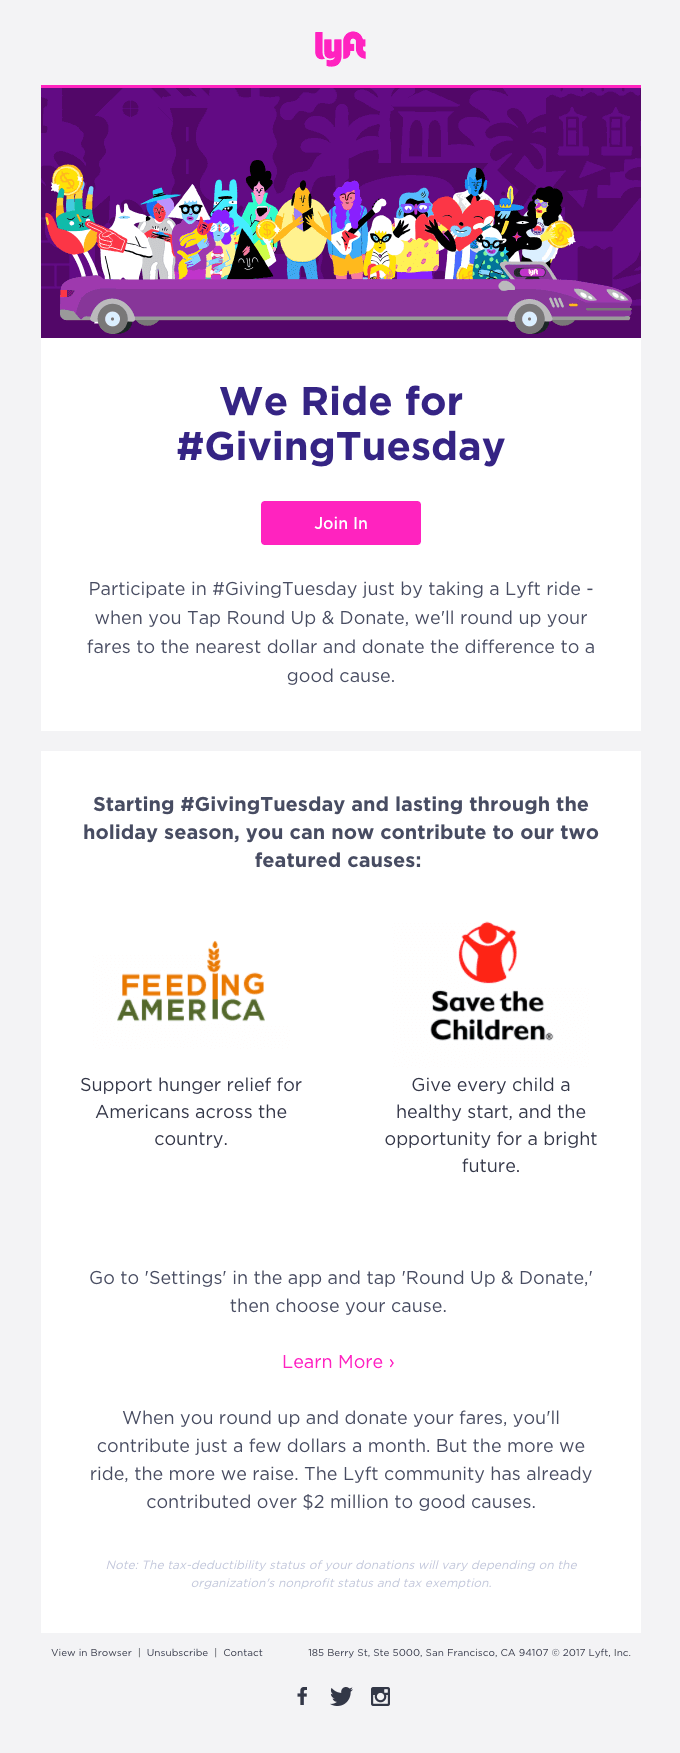 How Nonprofits Can Leverage Email Marketing for Giving Tuesday